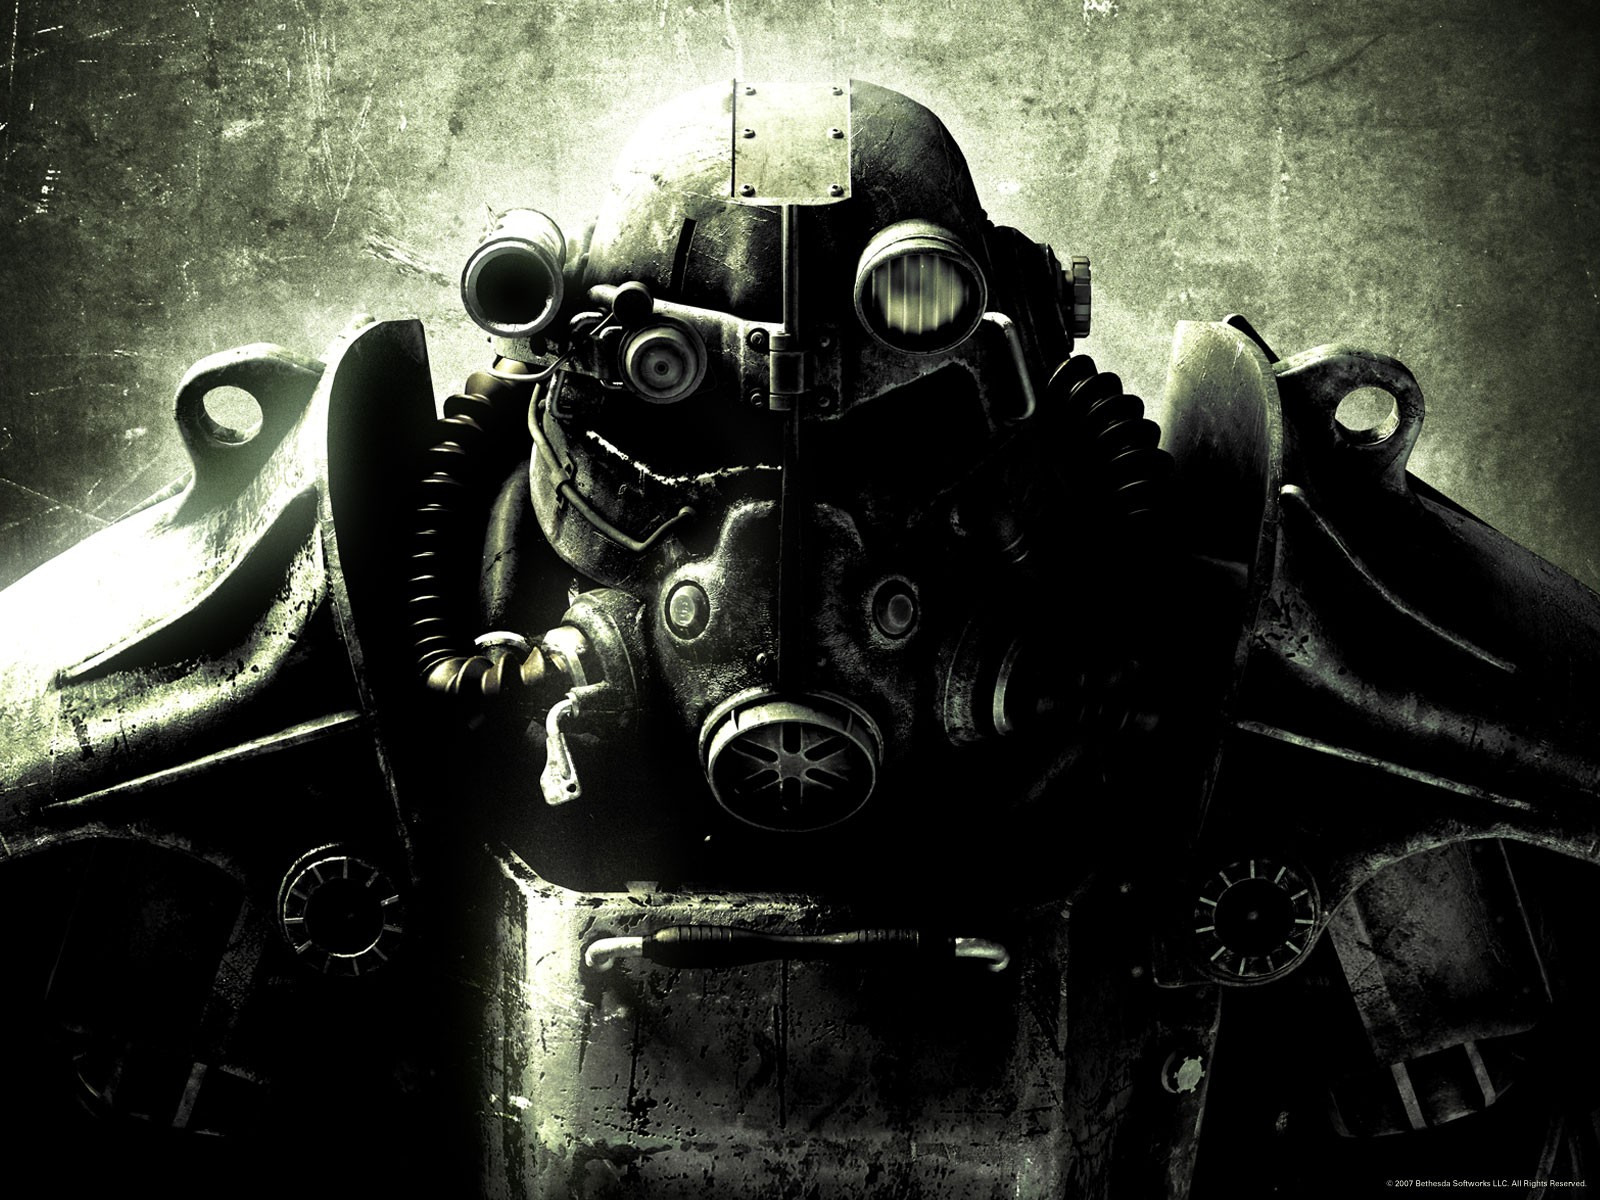 Ps4 Xbox One向けhd版 Fallout 3 が準備中か Bethesdaの気になる動き Game Spark 国内 海外ゲーム情報サイト